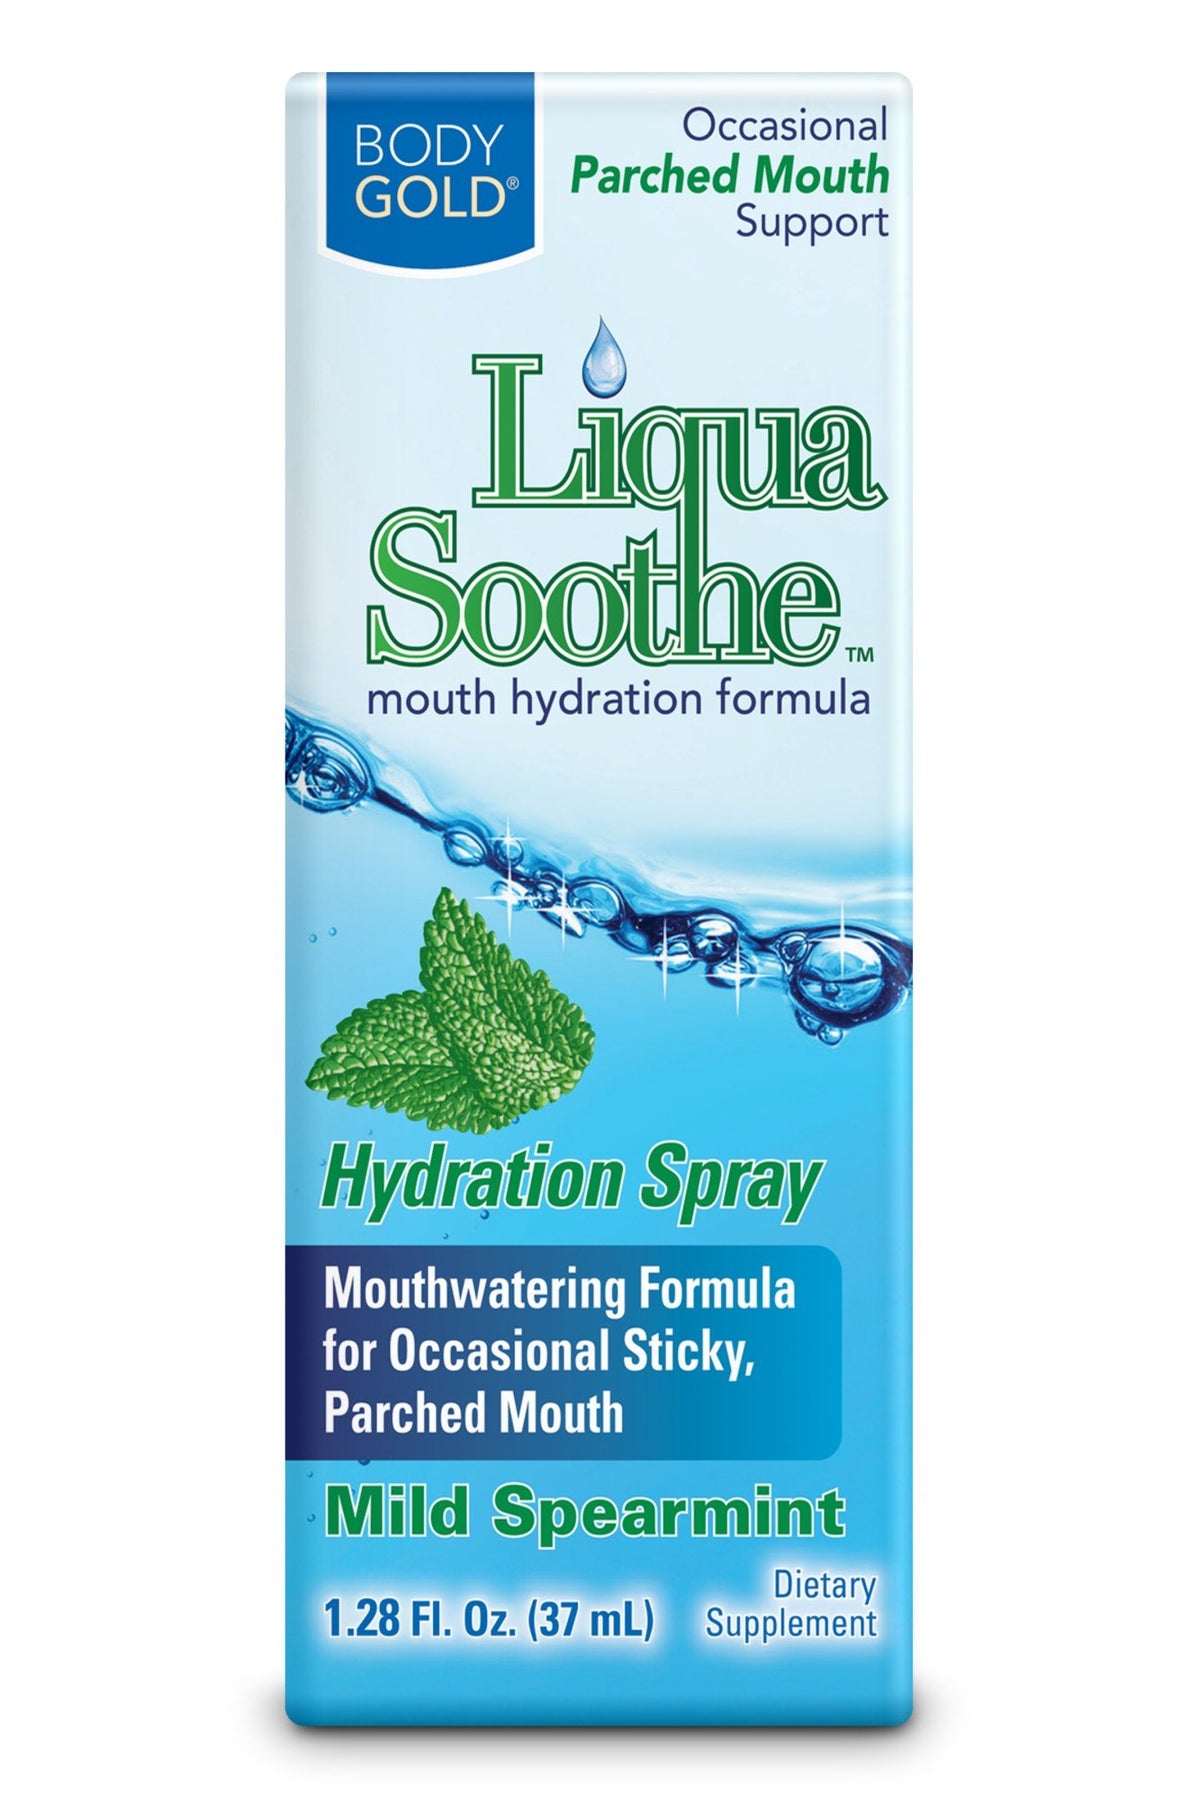 Body Gold Liqua-Soothe Parched Mouth Soothe 1.28 oz Liquid